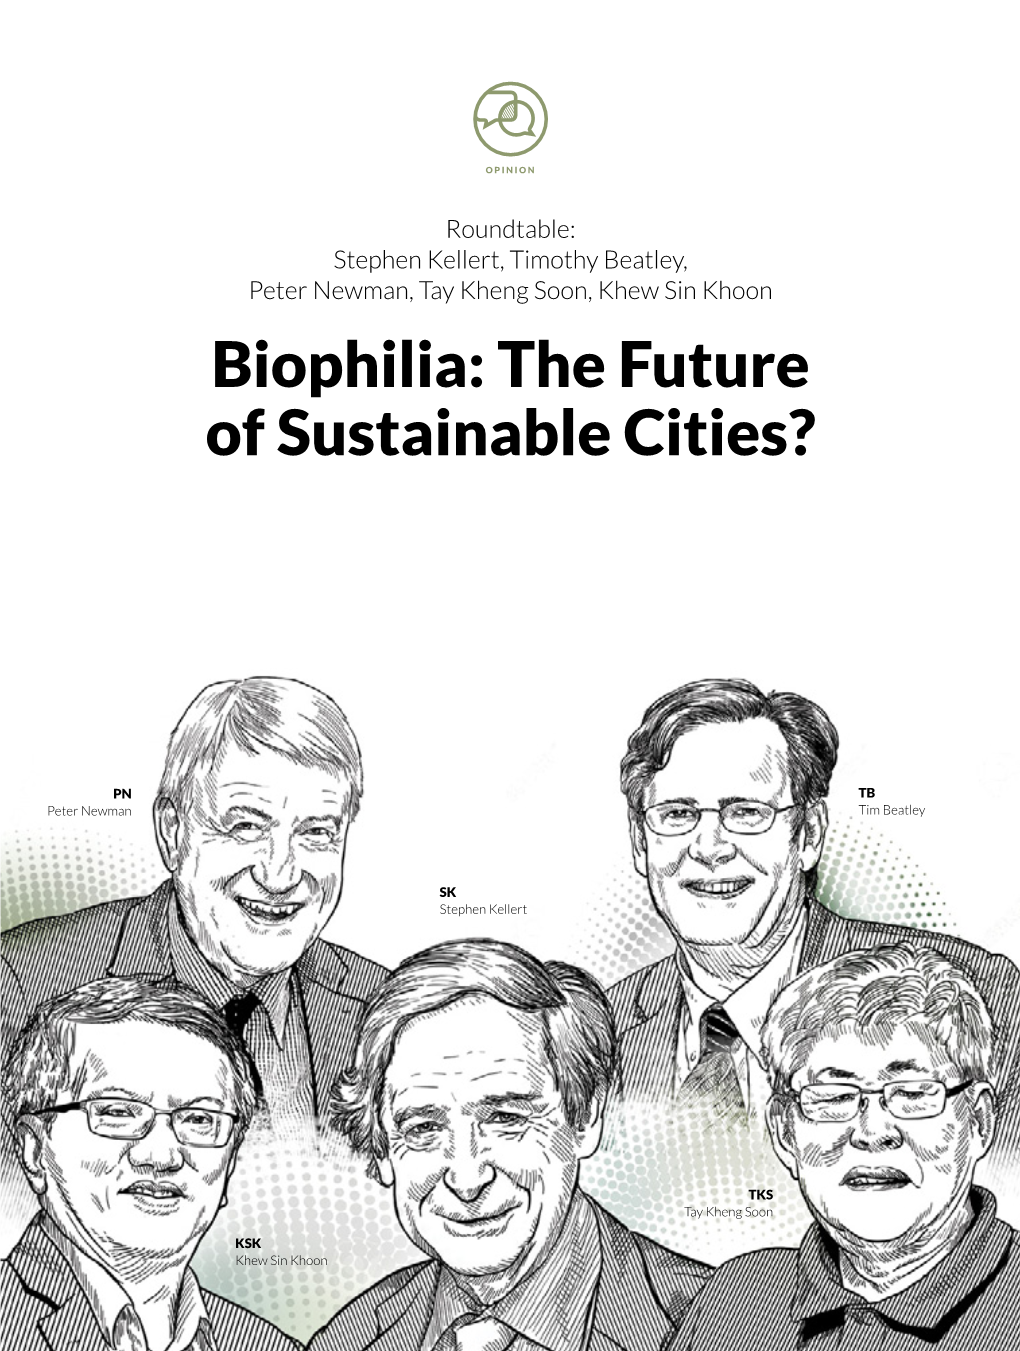 Biophilia: the Future of Sustainable Cities?